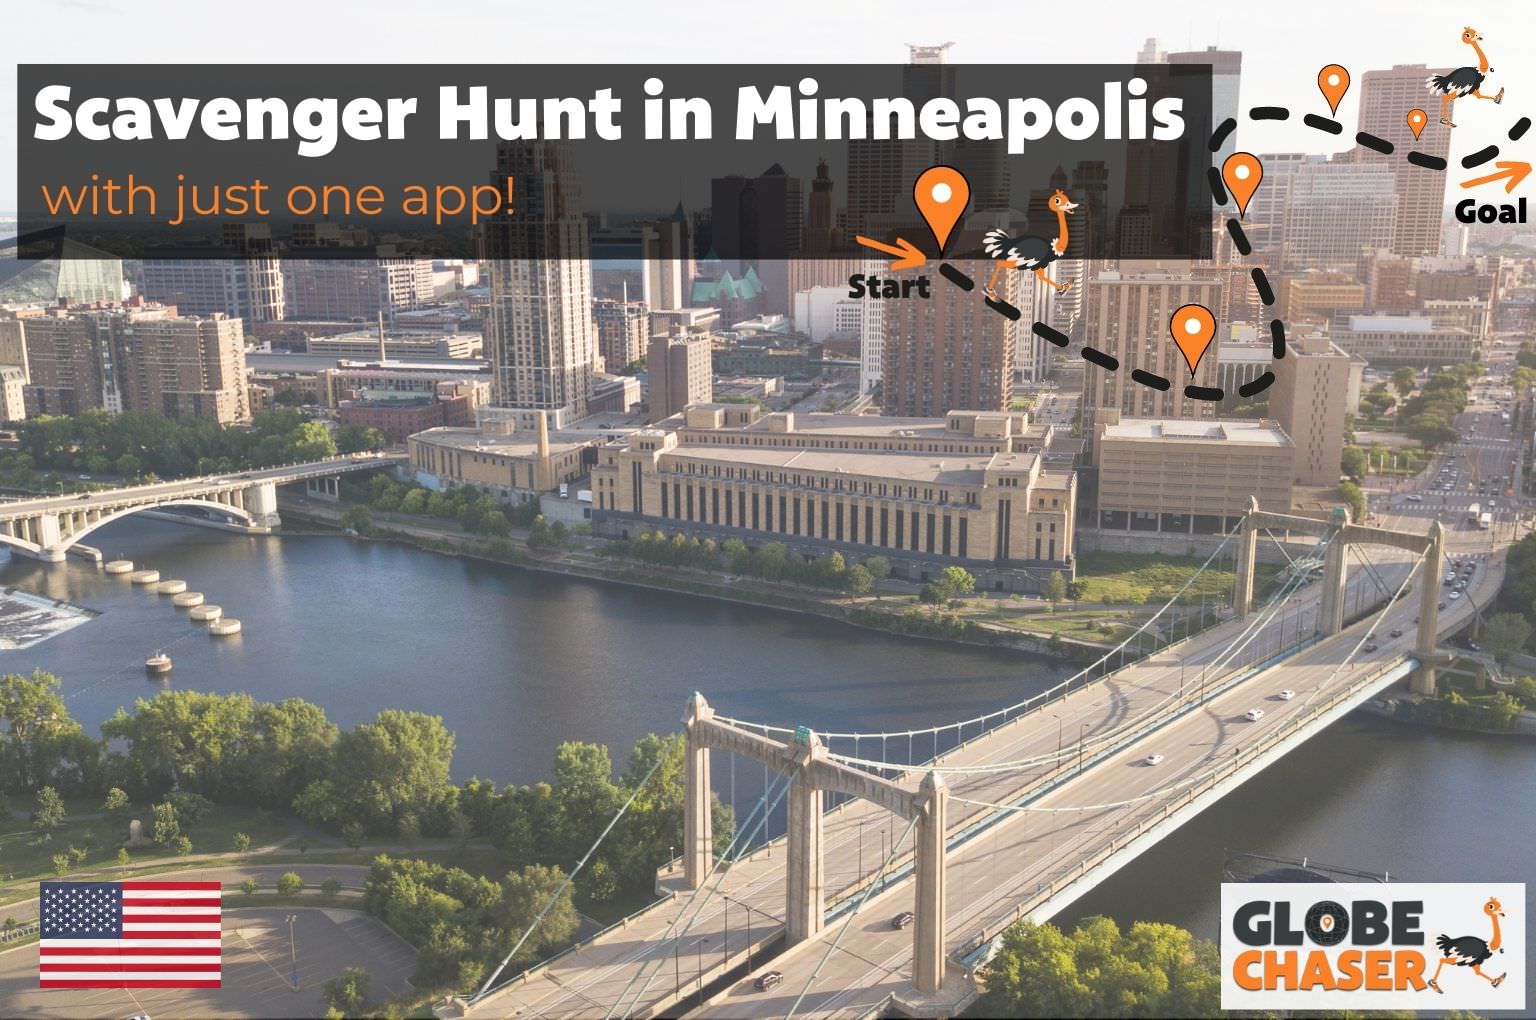 Scavenger Hunt in Minneapolis, USA - Family Activities with the Globe Chaser App for Outdoor Fun